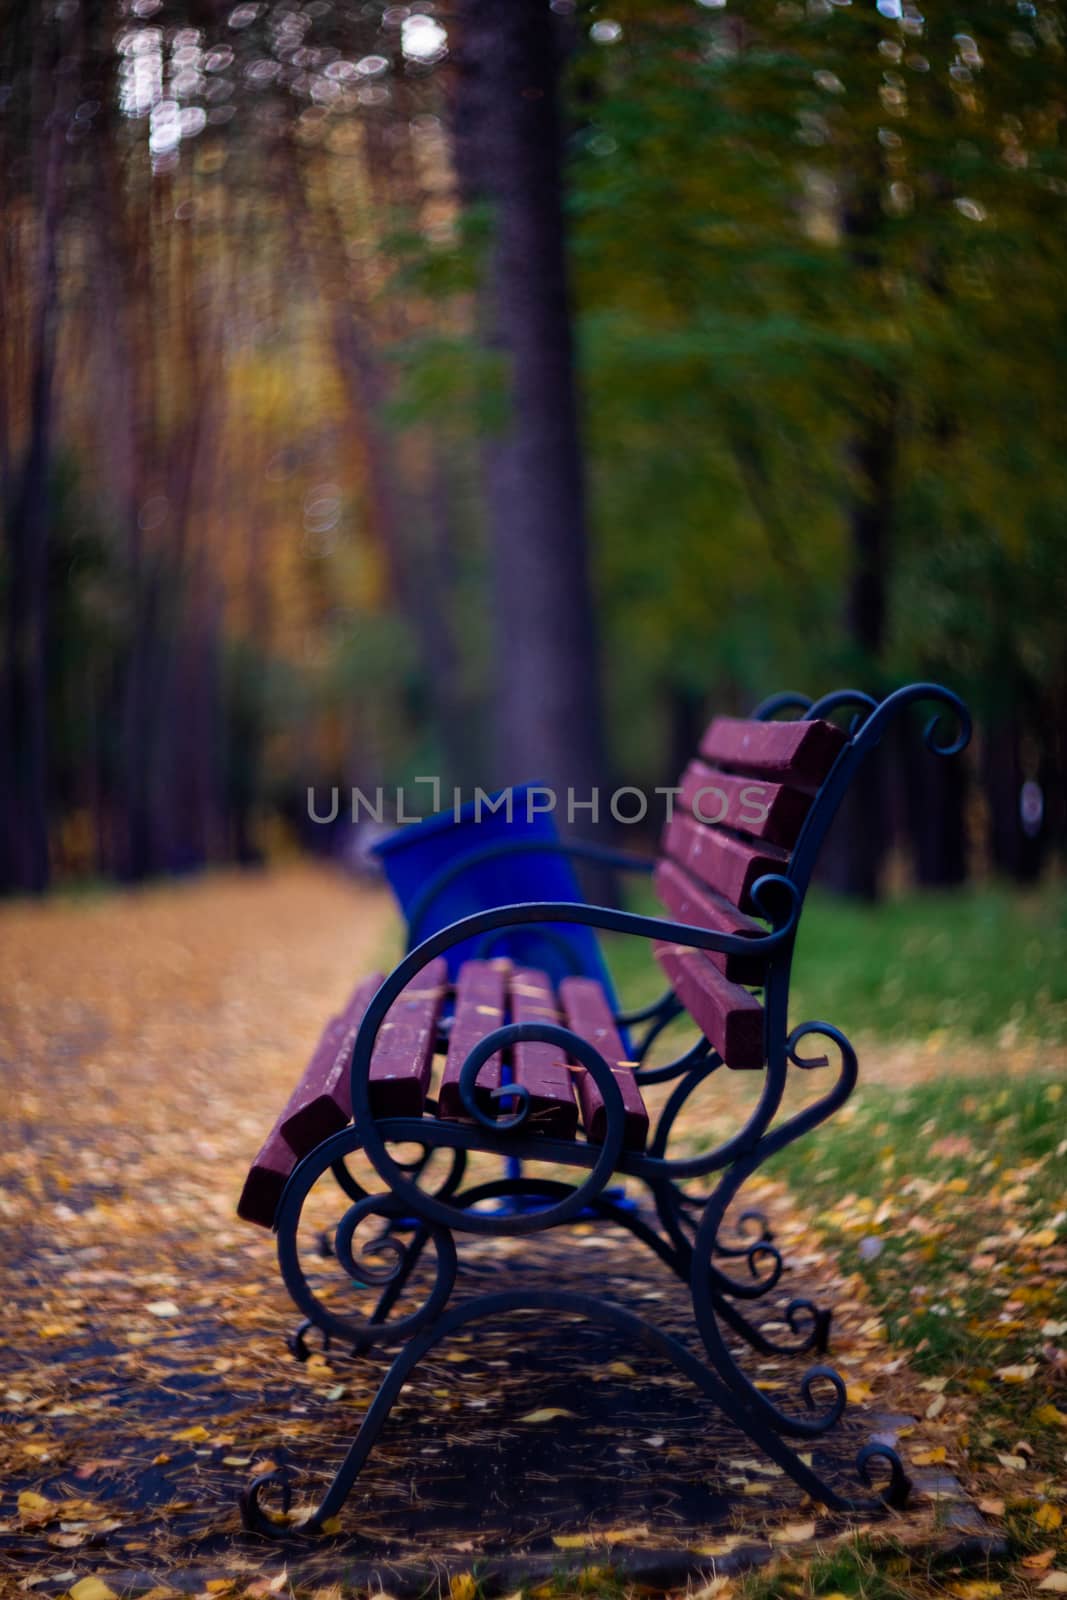 Bench in the park. It is autumn outside and there are some yellow leaves on the bench. The background is blurred.